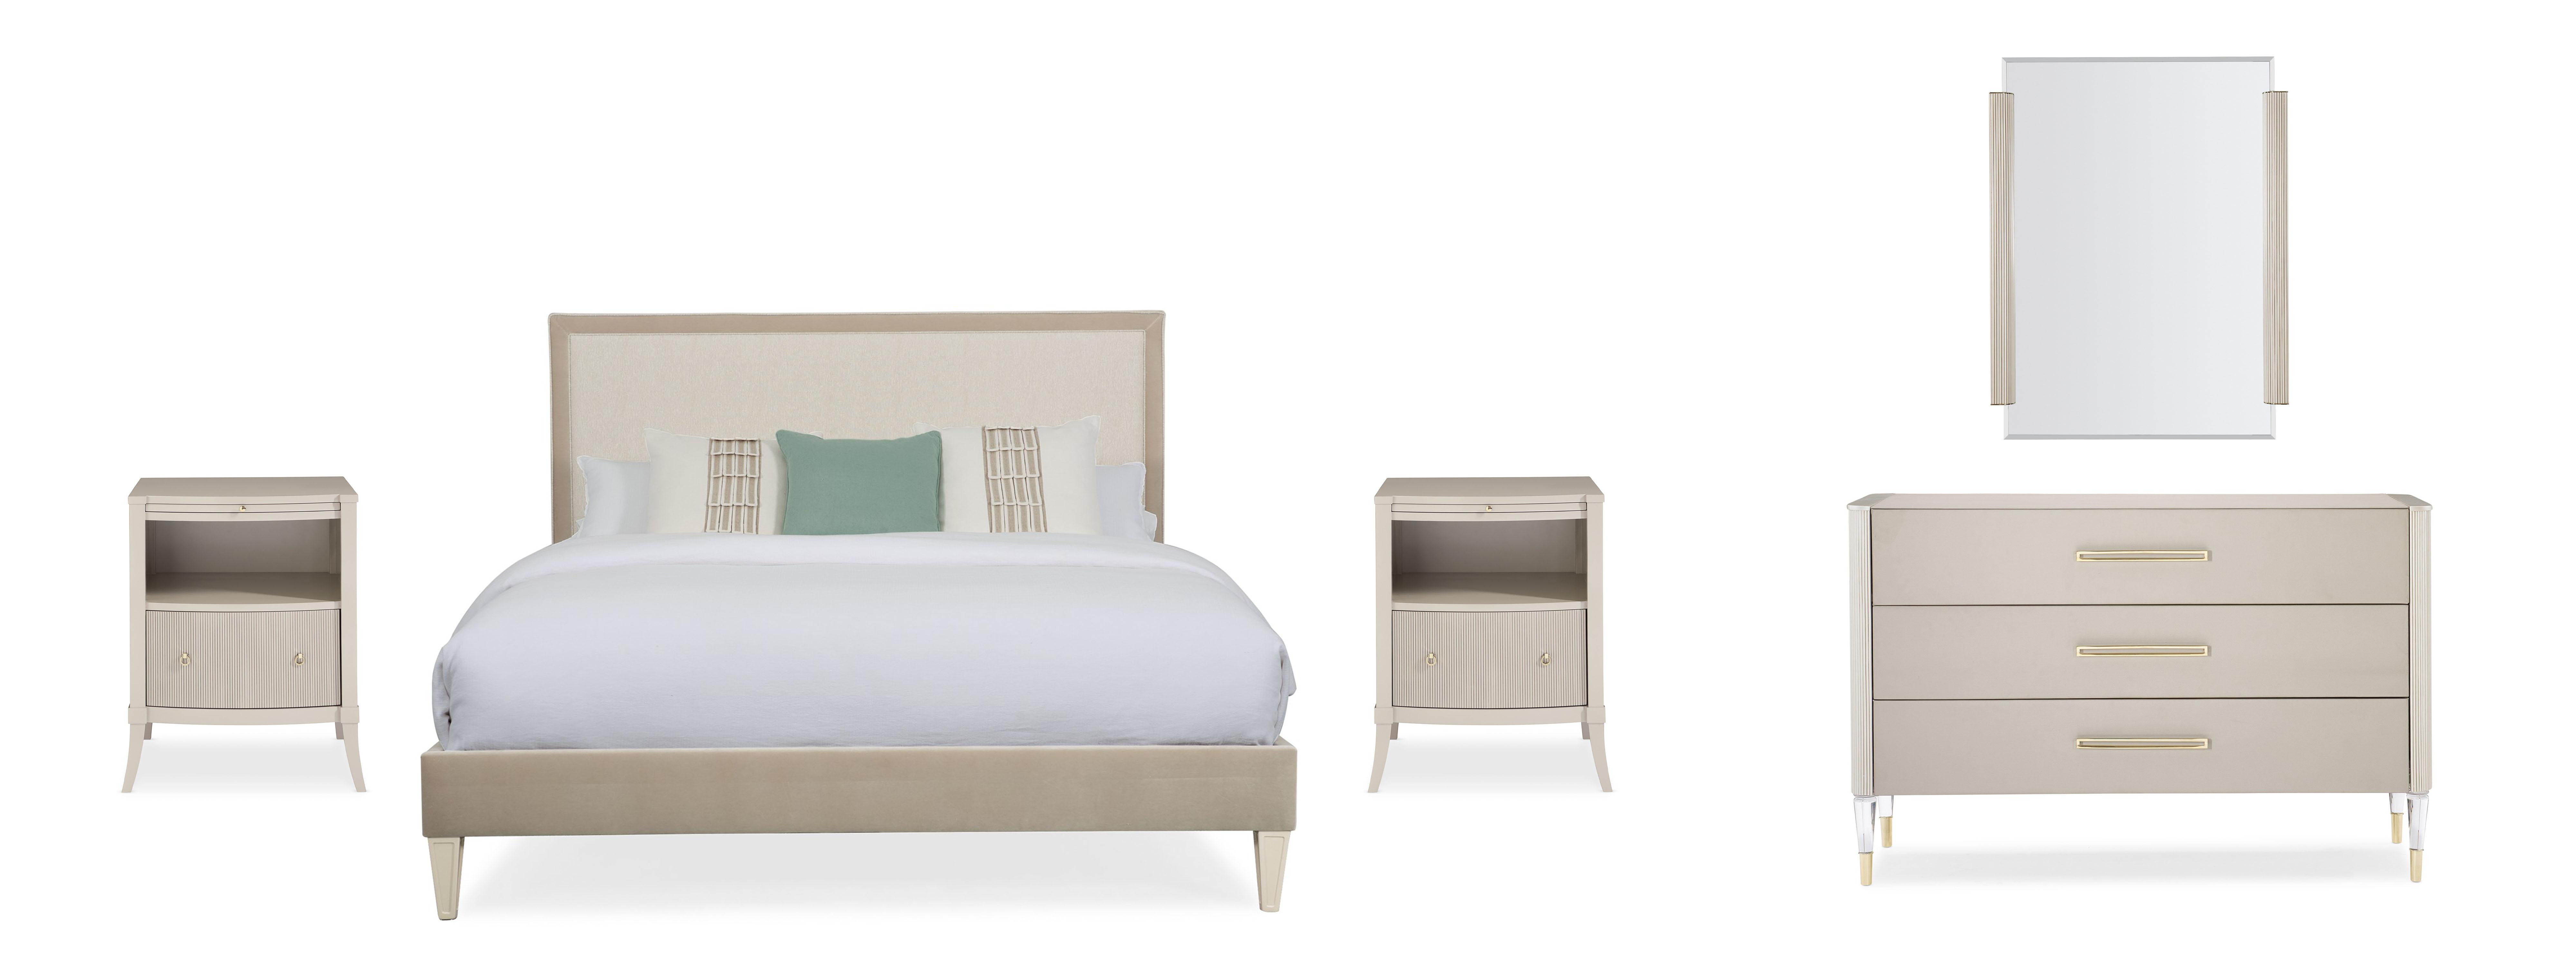 Contemporary Panel Bedroom Set LOVIE DOVIE / NEW LOVE / I LOVE IT! / LOVE TO LOOK! CLA-420-143-Set-5 in Taupe Fabric